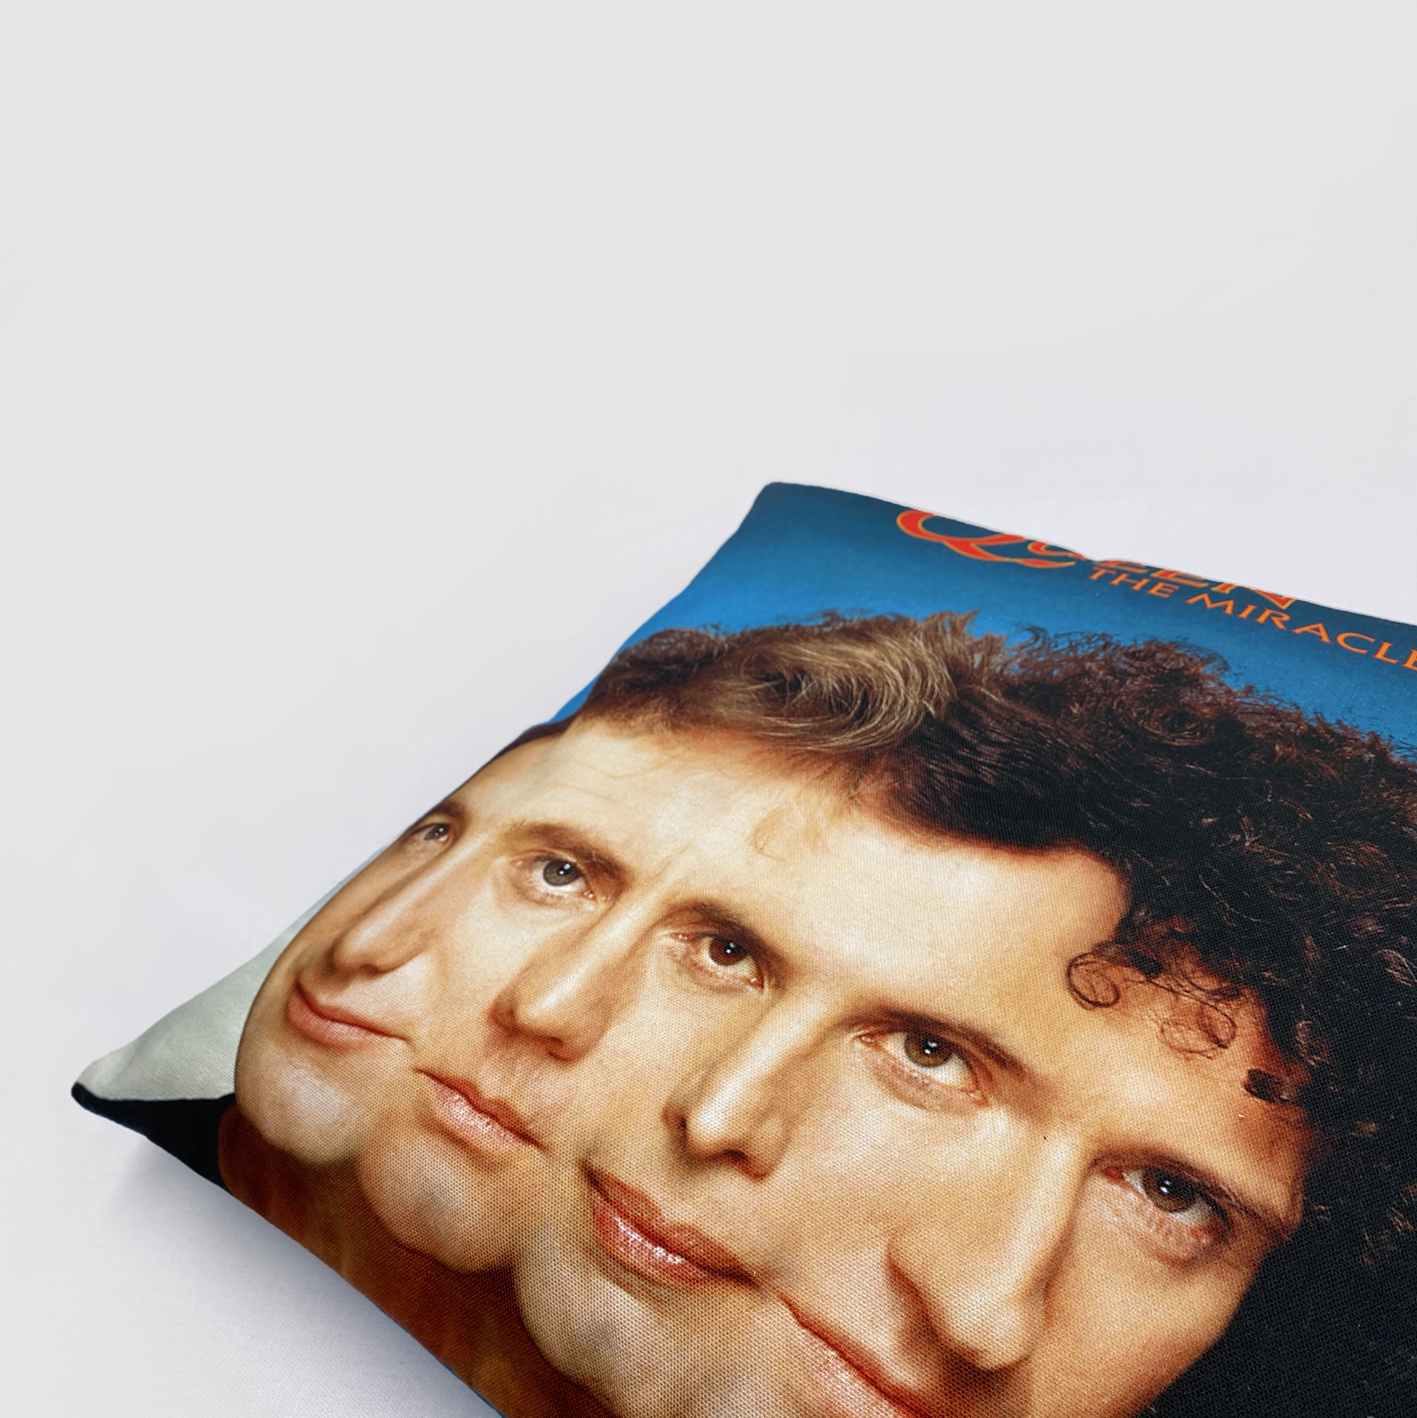 Queen and The Miracle cushion cover merchandise.